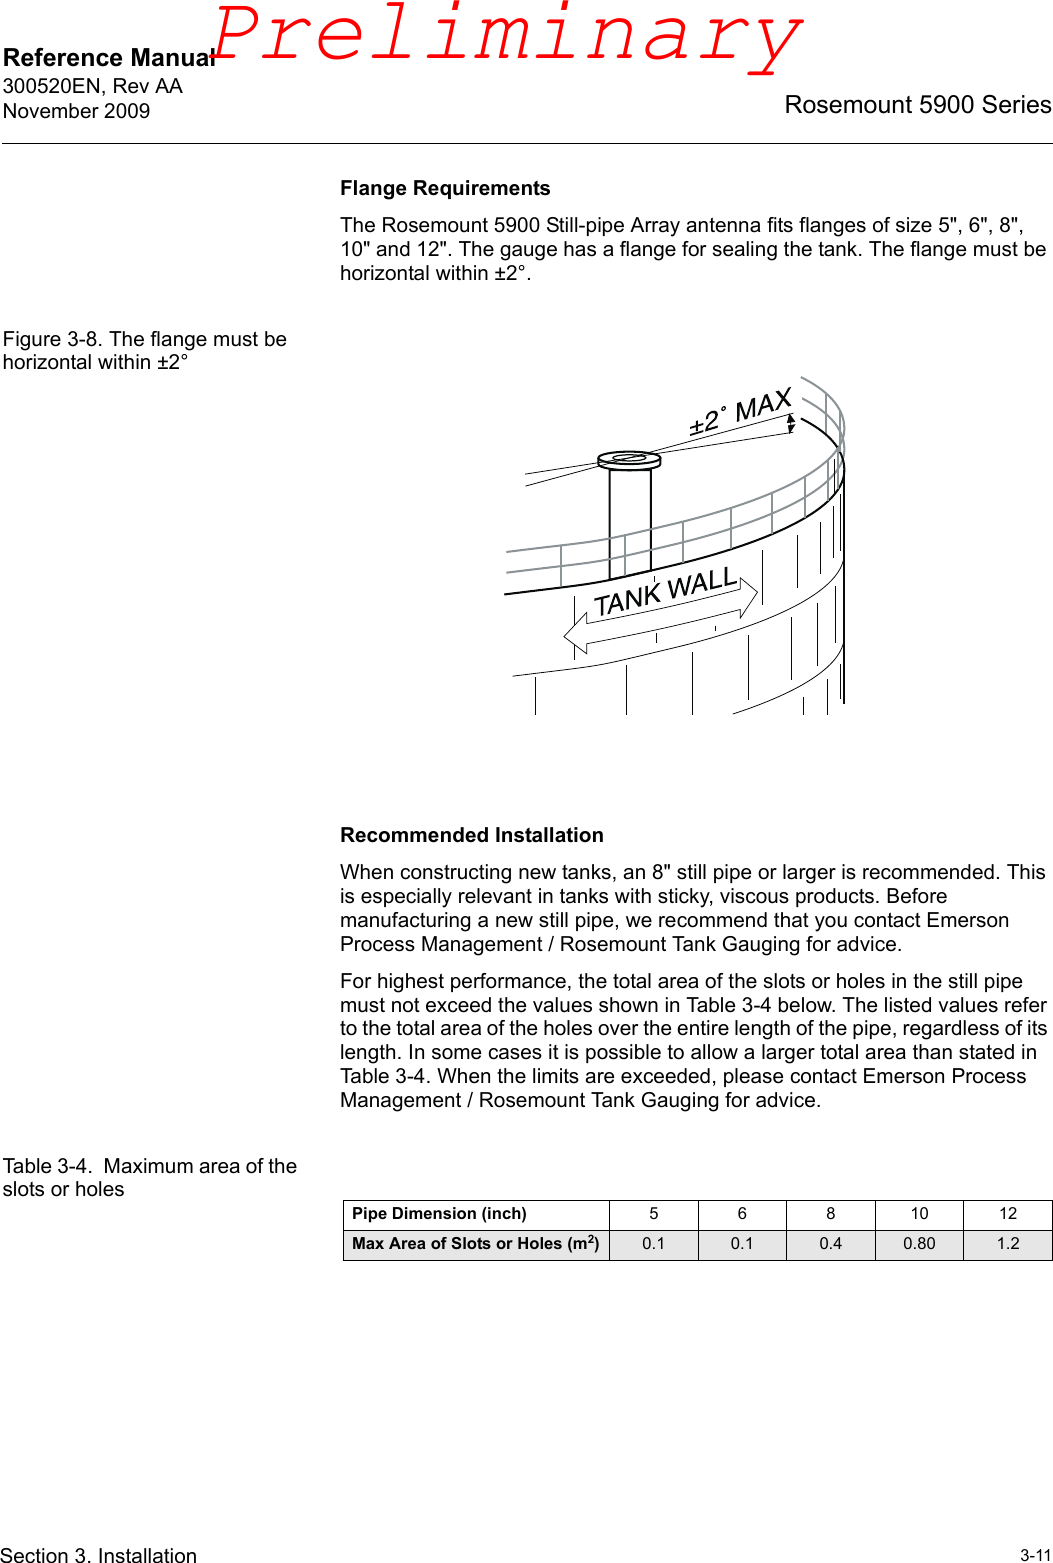 Reference Manual 300520EN, Rev AANovember 20093-11Rosemount 5900 SeriesSection 3. InstallationFlange RequirementsThe Rosemount 5900 Still-pipe Array antenna fits flanges of size 5&quot;, 6&quot;, 8&quot;, 10&quot; and 12&quot;. The gauge has a flange for sealing the tank. The flange must be horizontal within ±2°. Figure 3-8. The flange must be horizontal within ±2°Recommended InstallationWhen constructing new tanks, an 8&quot; still pipe or larger is recommended. This is especially relevant in tanks with sticky, viscous products. Before manufacturing a new still pipe, we recommend that you contact Emerson Process Management / Rosemount Tank Gauging for advice. For highest performance, the total area of the slots or holes in the still pipe must not exceed the values shown in Table 3-4 below. The listed values refer to the total area of the holes over the entire length of the pipe, regardless of its length. In some cases it is possible to allow a larger total area than stated in Table 3-4. When the limits are exceeded, please contact Emerson Process Management / Rosemount Tank Gauging for advice. Table 3-4.  Maximum area of the slots or holesPipe Dimension (inch) 5 6 8 10 12Max Area of Slots or Holes (m2)0.1 0.1 0.4 0.80 1.2Preliminary